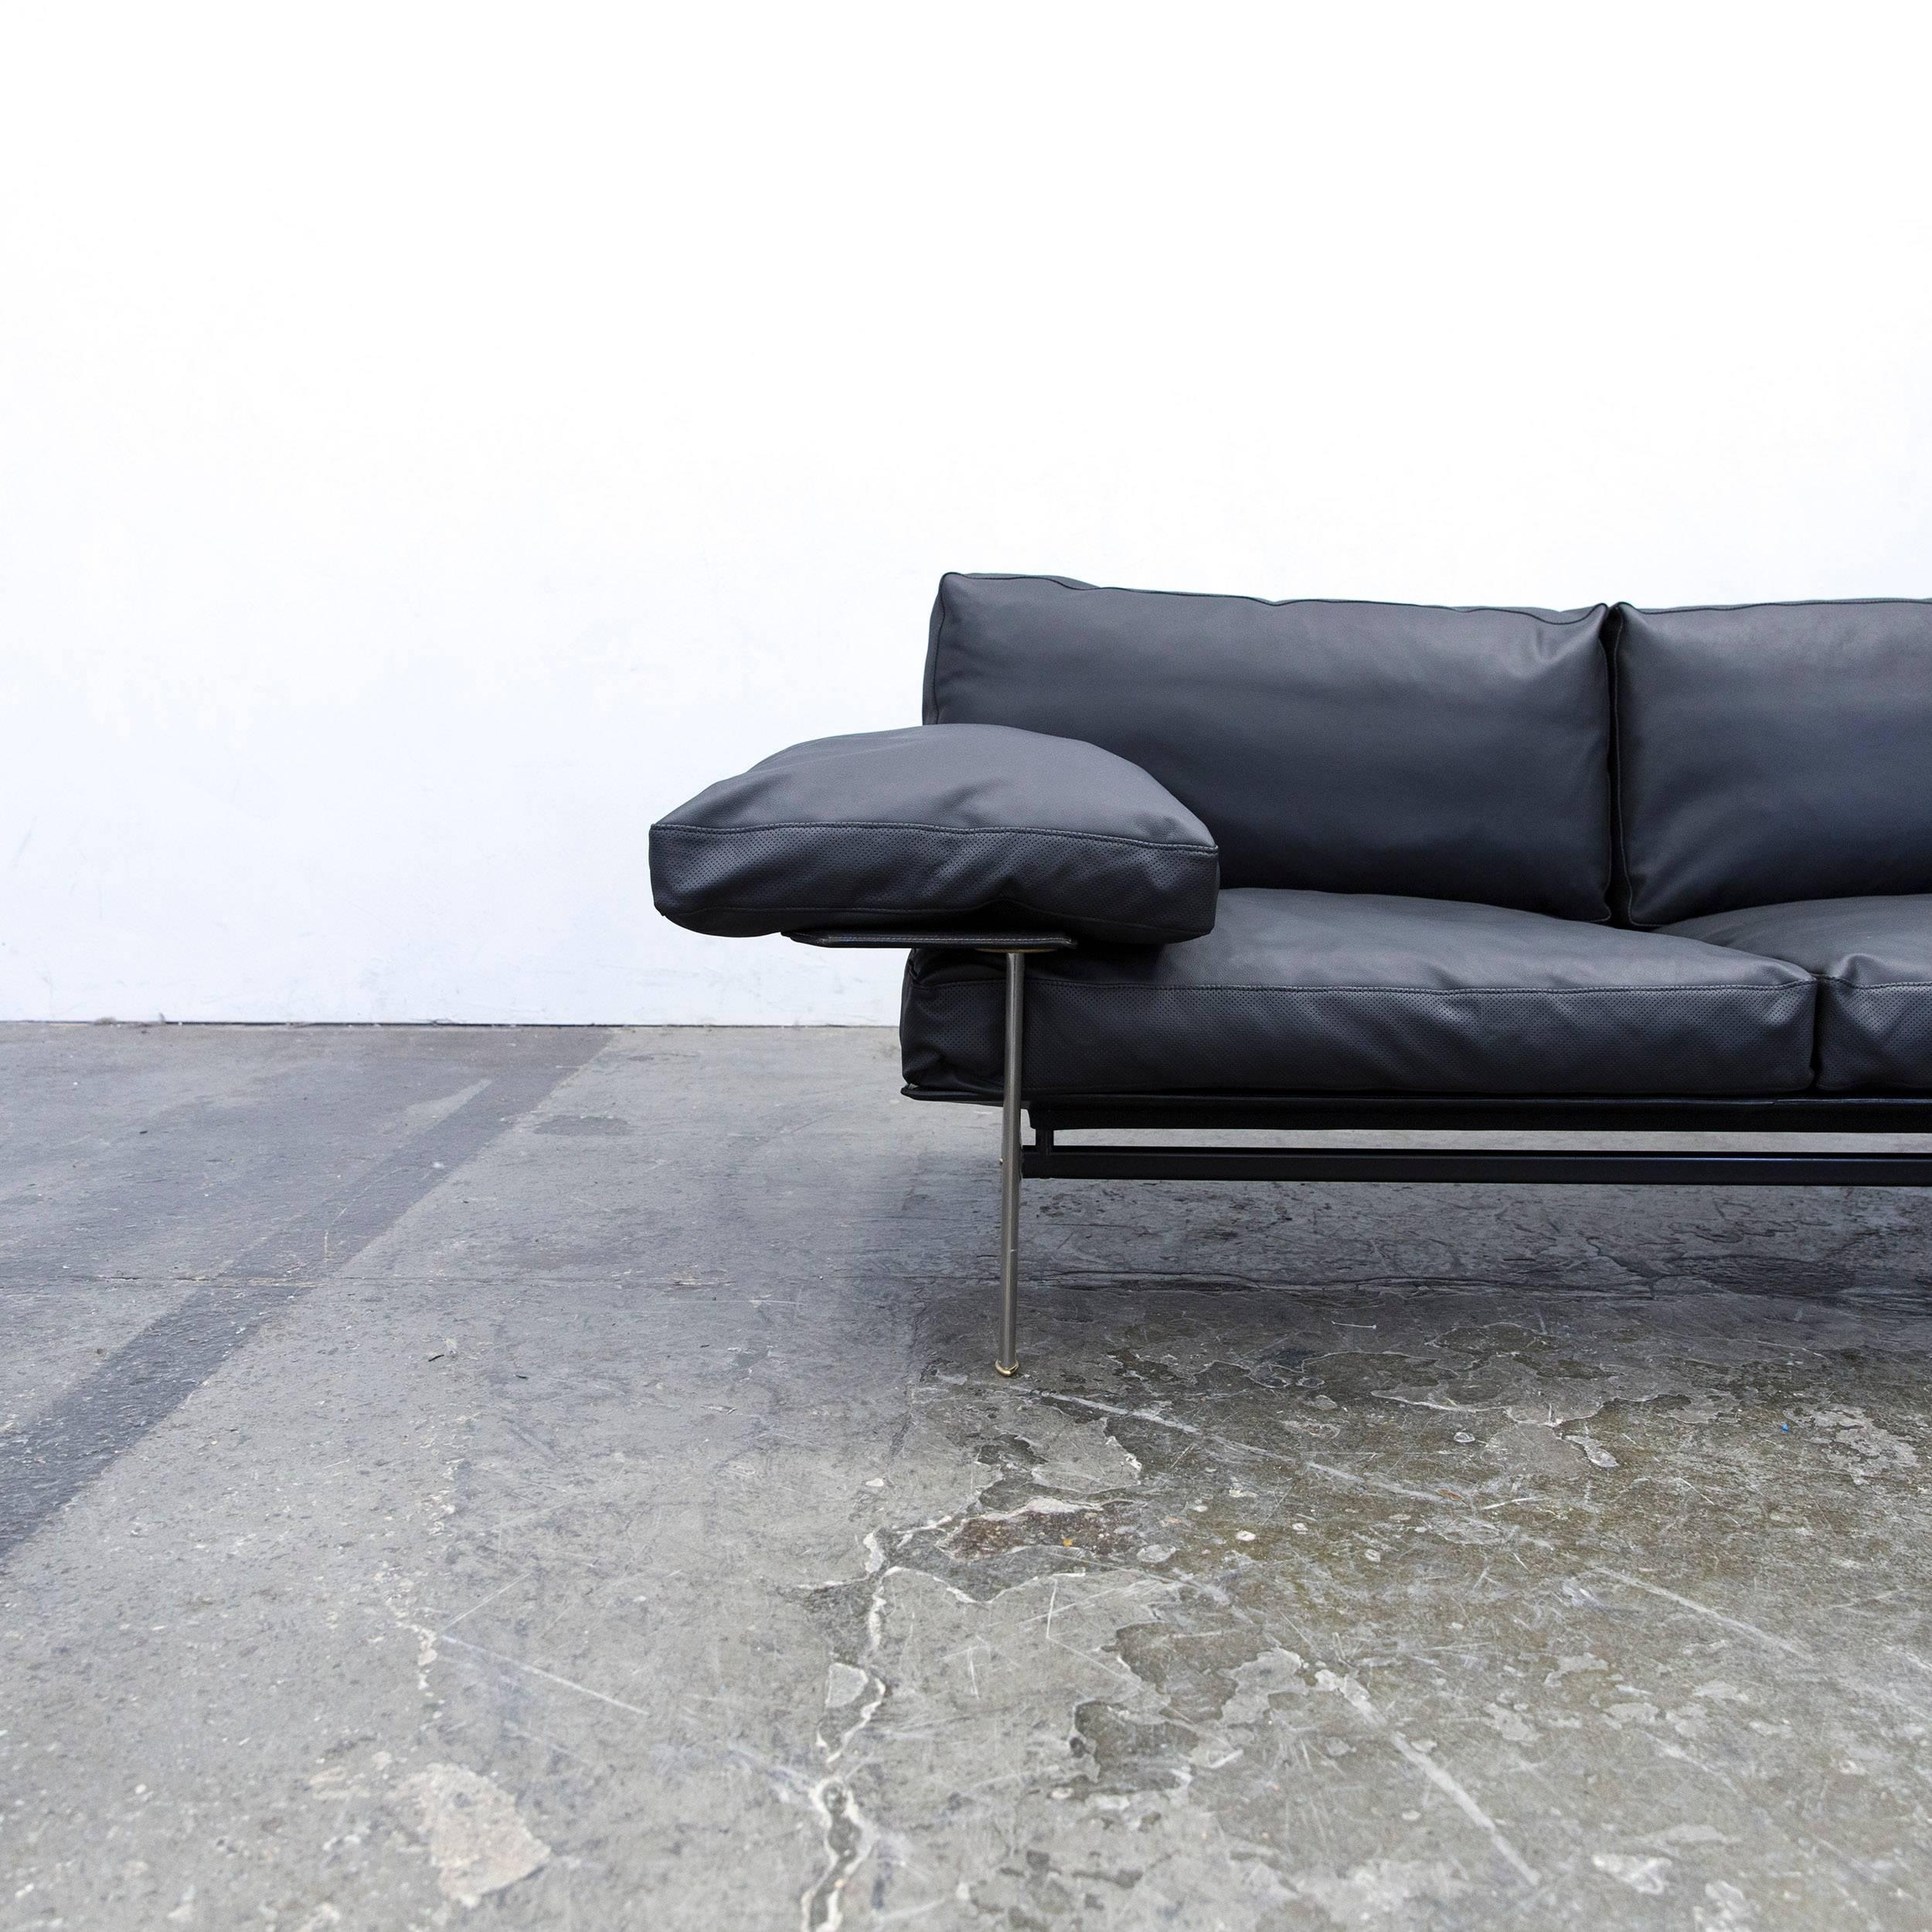 Black colored original B&B Italia Diesis designer leather sofa, in a minimalistic and modern design, made for pure comfort and style.